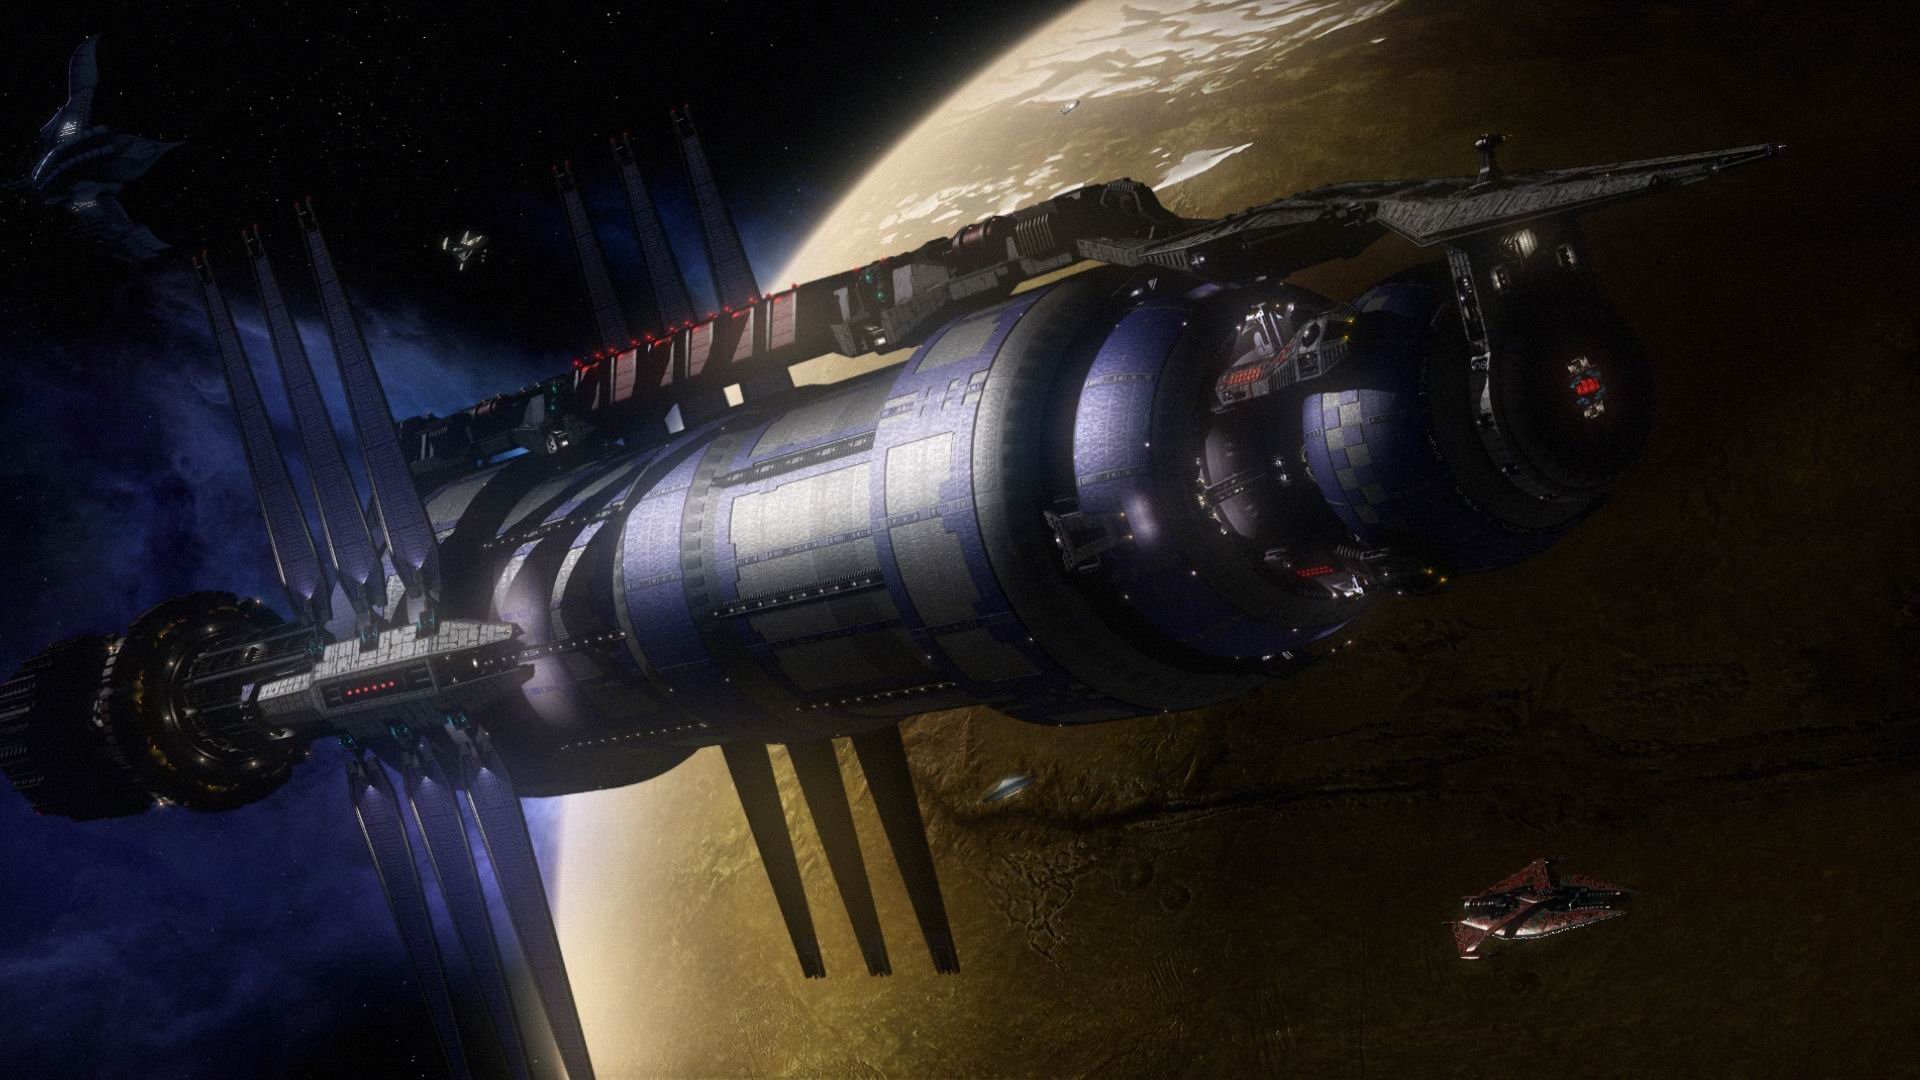 37 babylon 5 hd wallpapers background images wallpaper abyss 37 babylon 5 hd wallpapers background